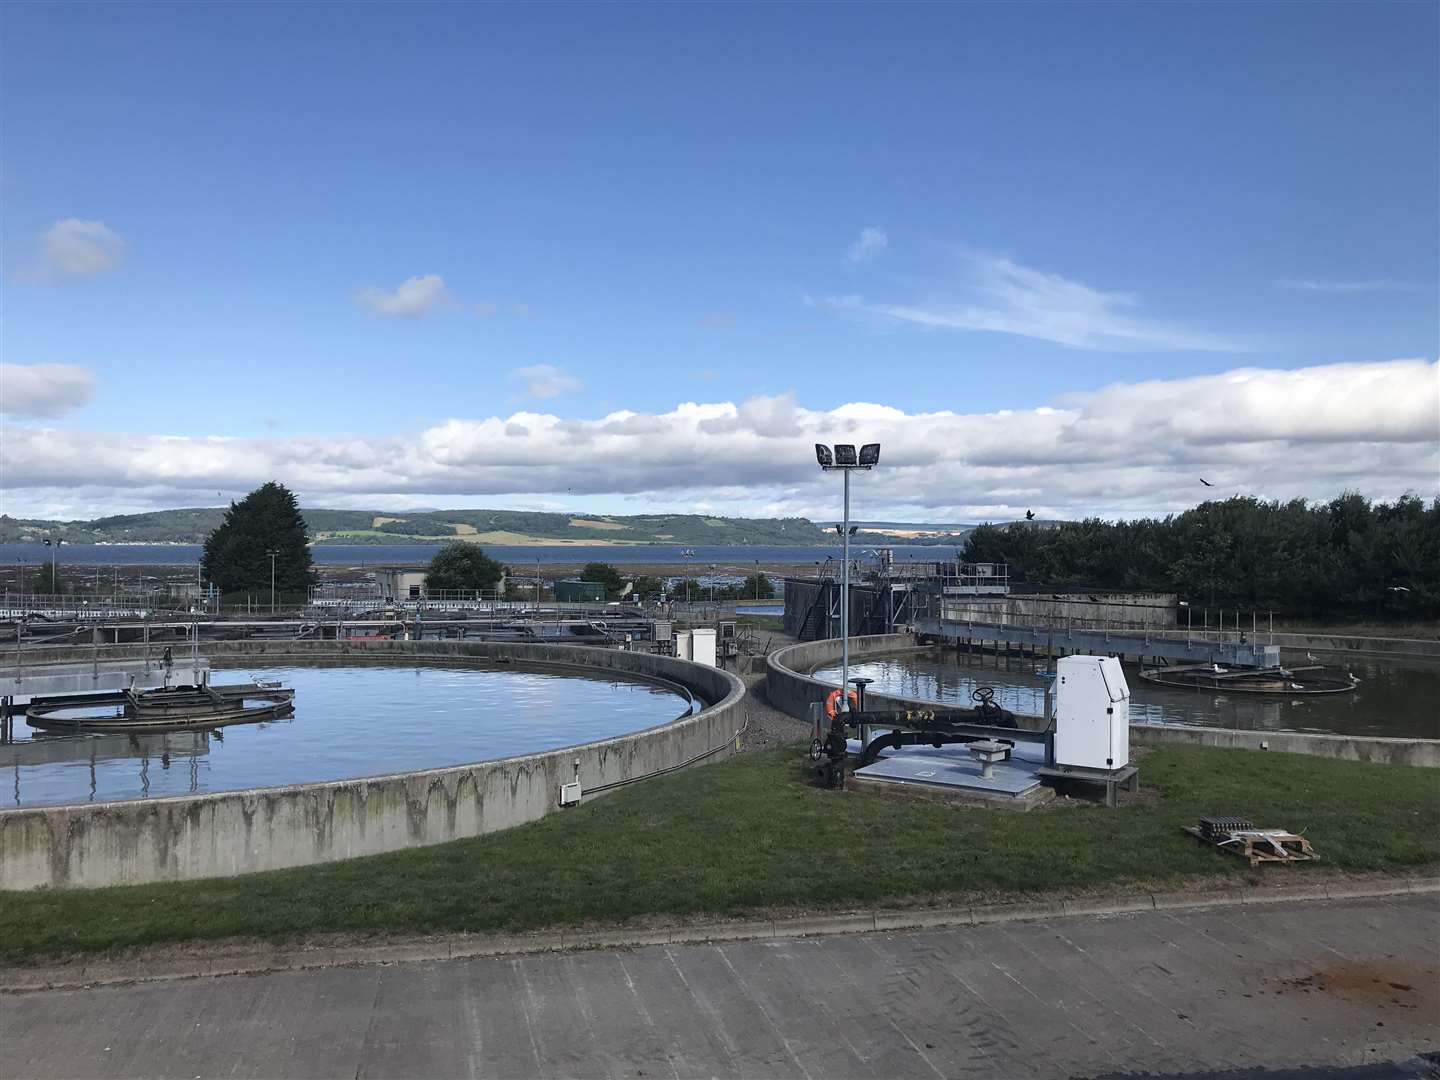 Allanfearn Water Works in Inverness has been a test site